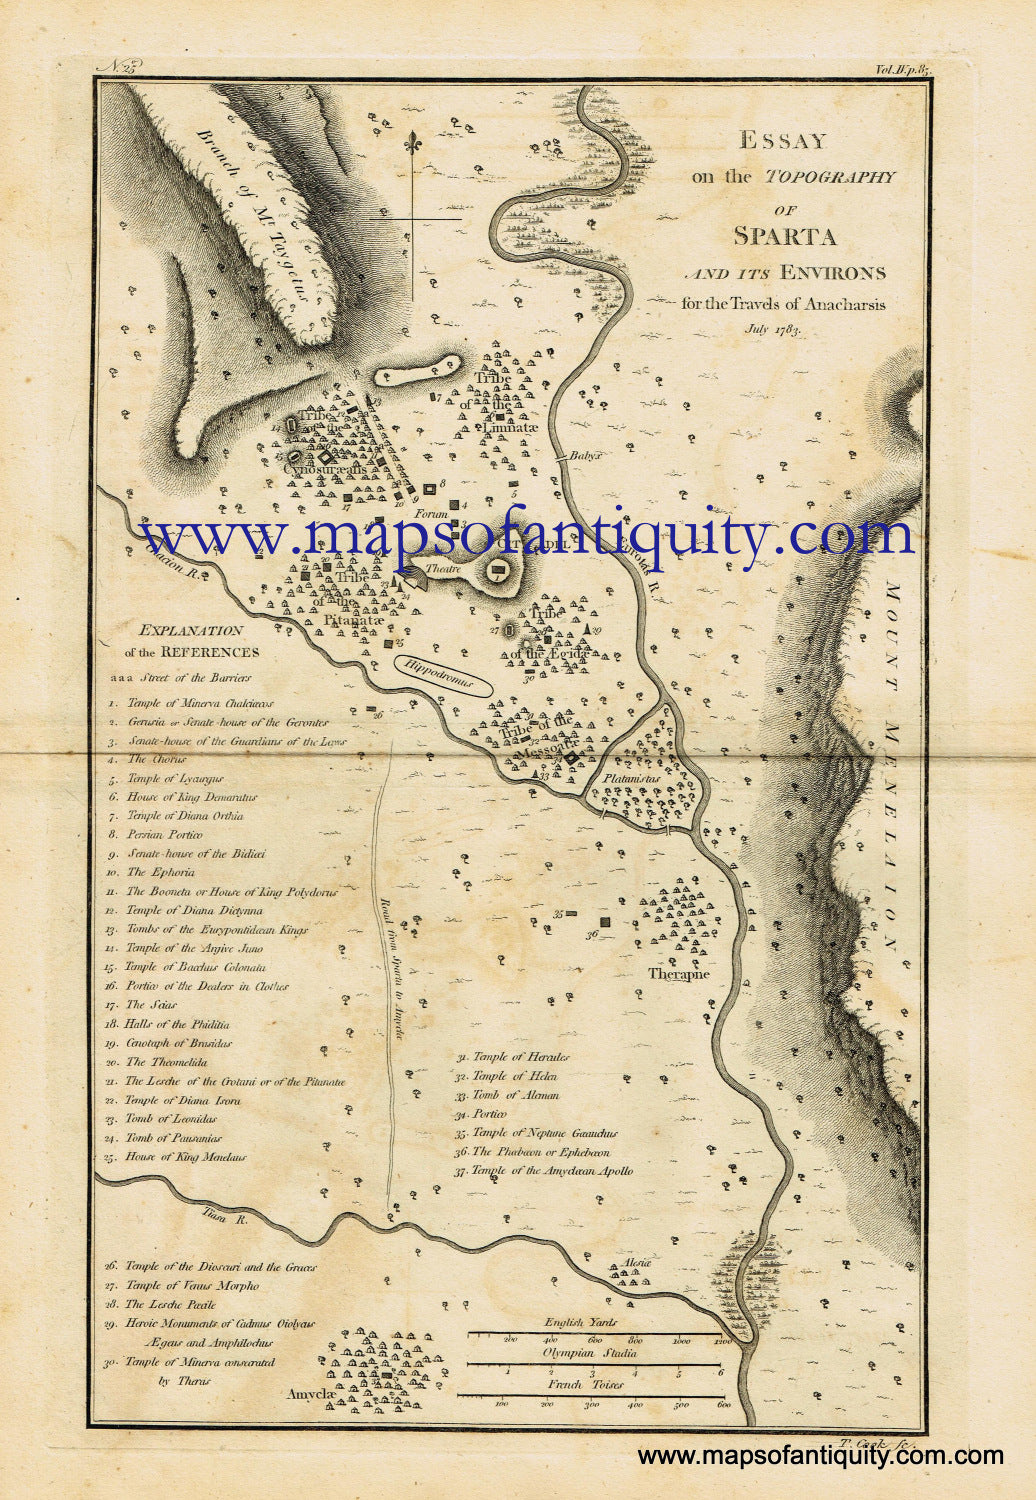 Antique-Black-and-White-Map-Essay-on-the-Topography-of-Sparta-and-its-Environs-Europe-Greece-1791-Barbie-du-Bocage-Maps-Of-Antiquity